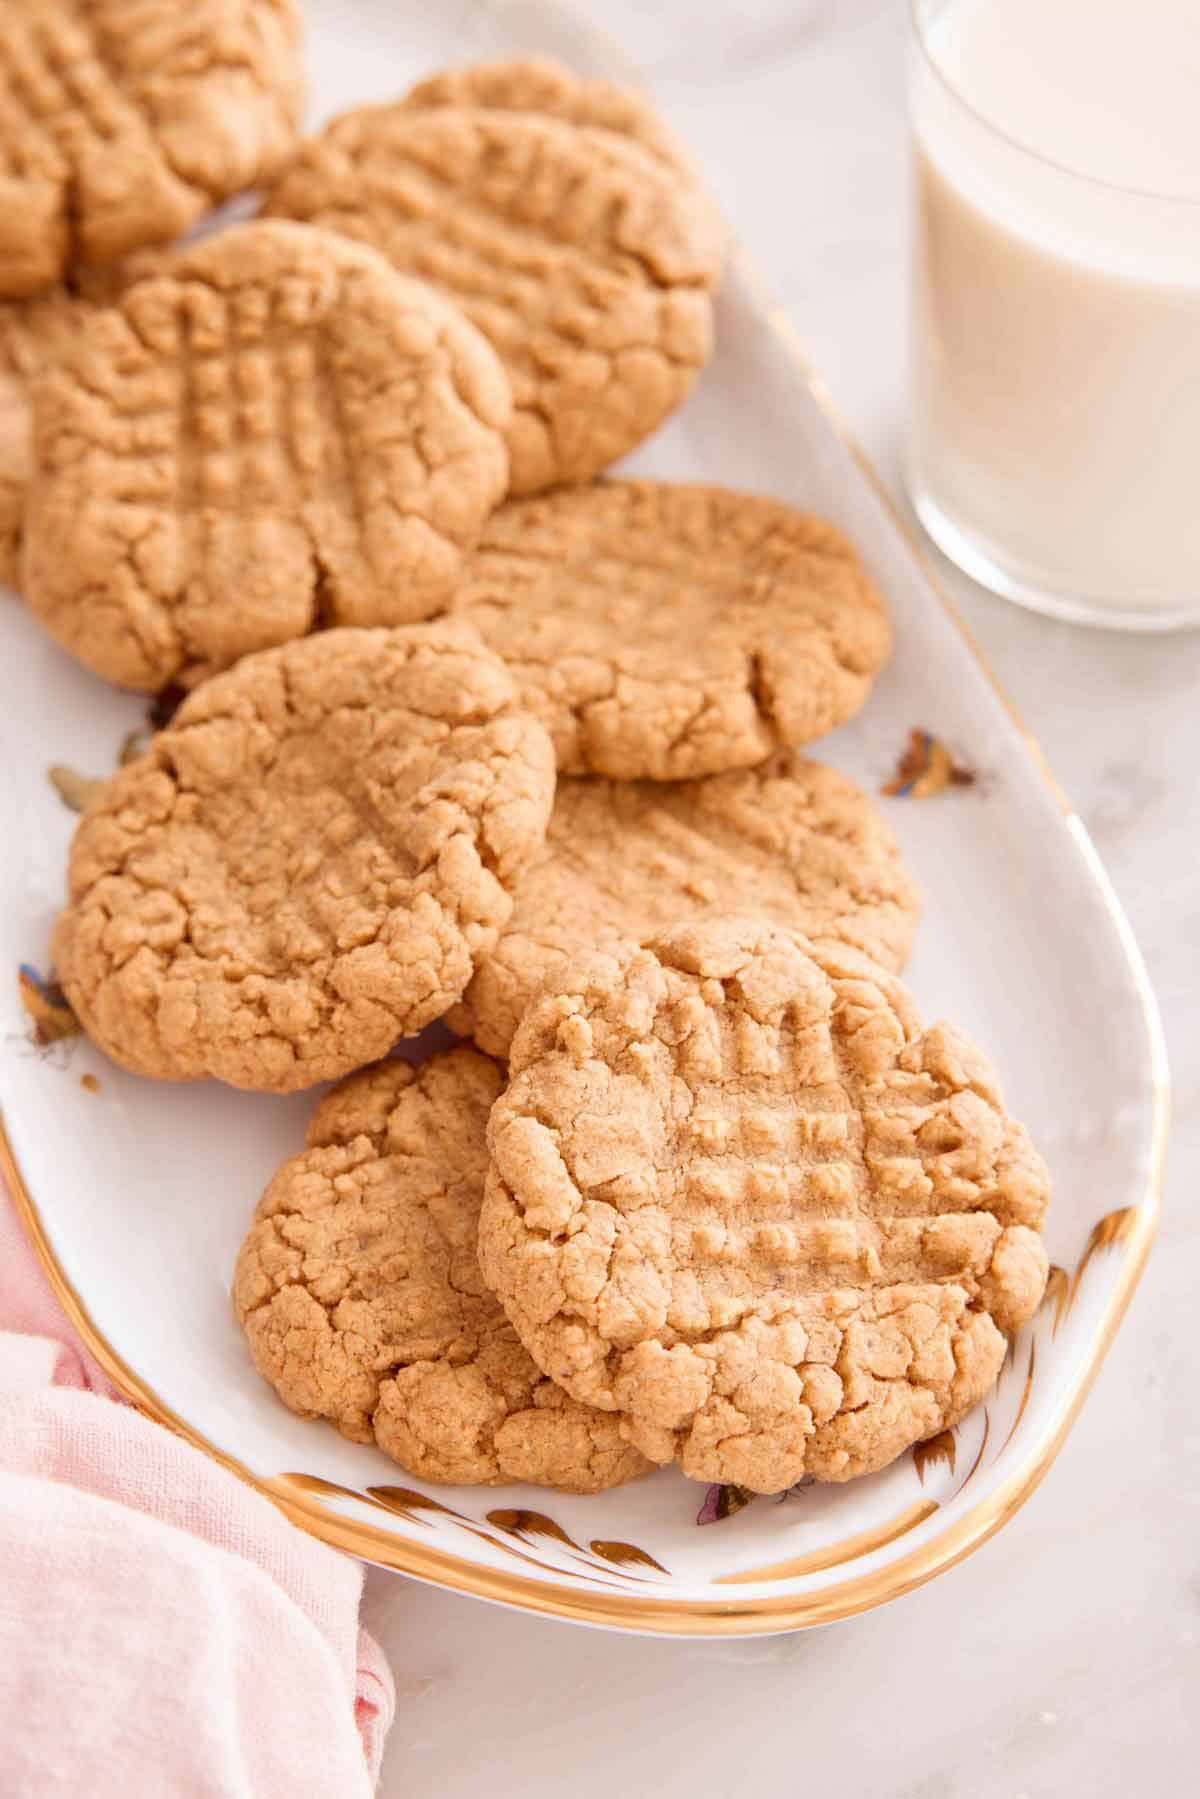 A platter with almond butter cookies with a glass of milk on the side.